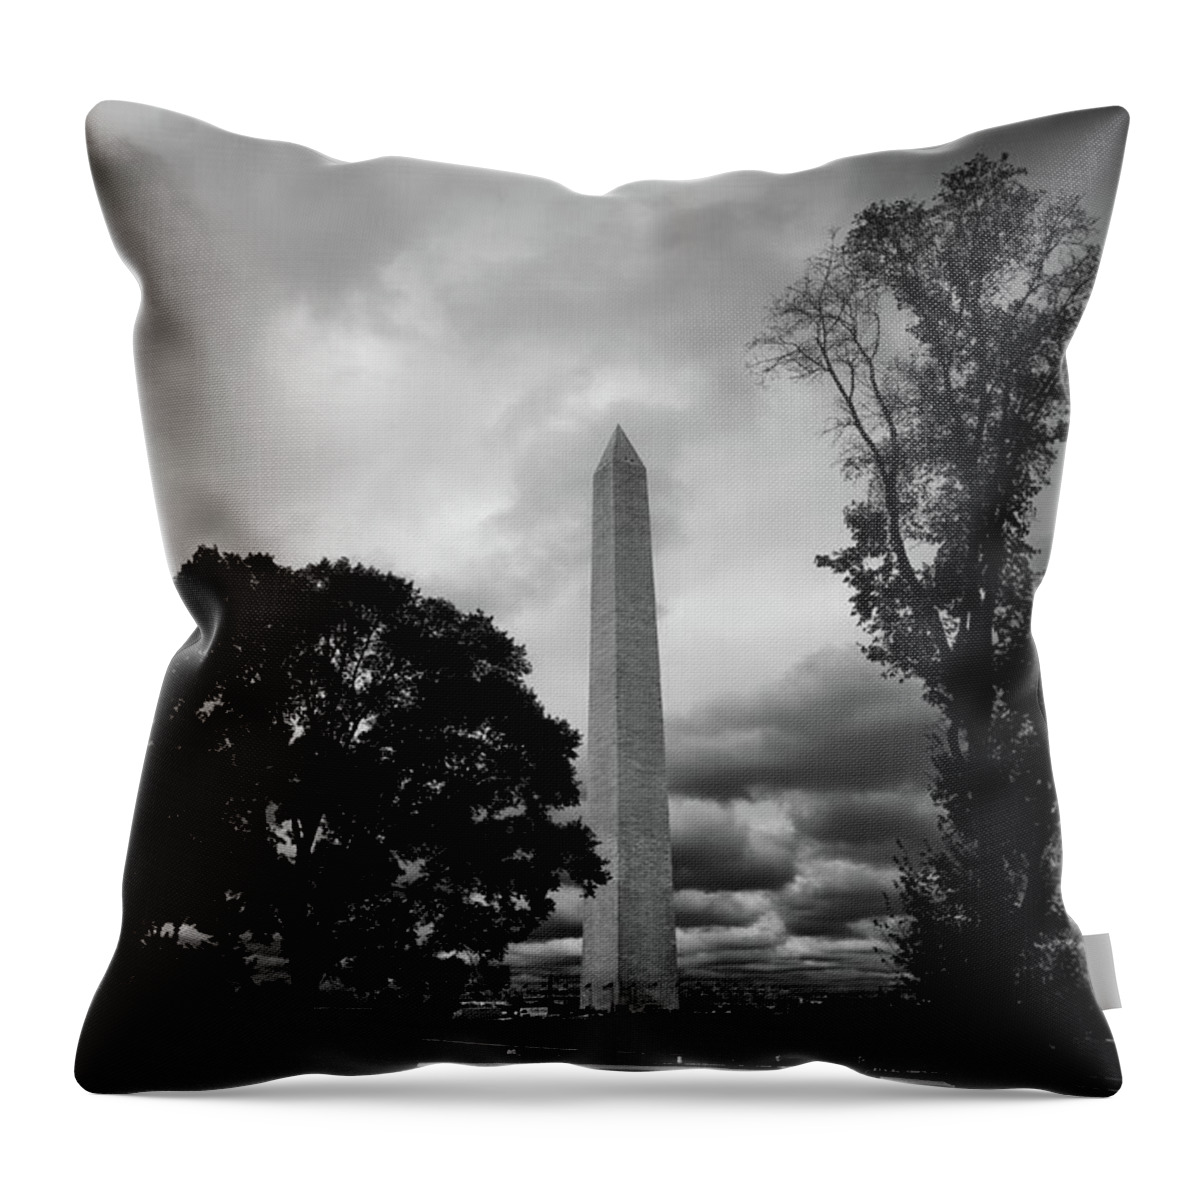 Clouds Throw Pillow featuring the photograph The Washington Monument by George Taylor